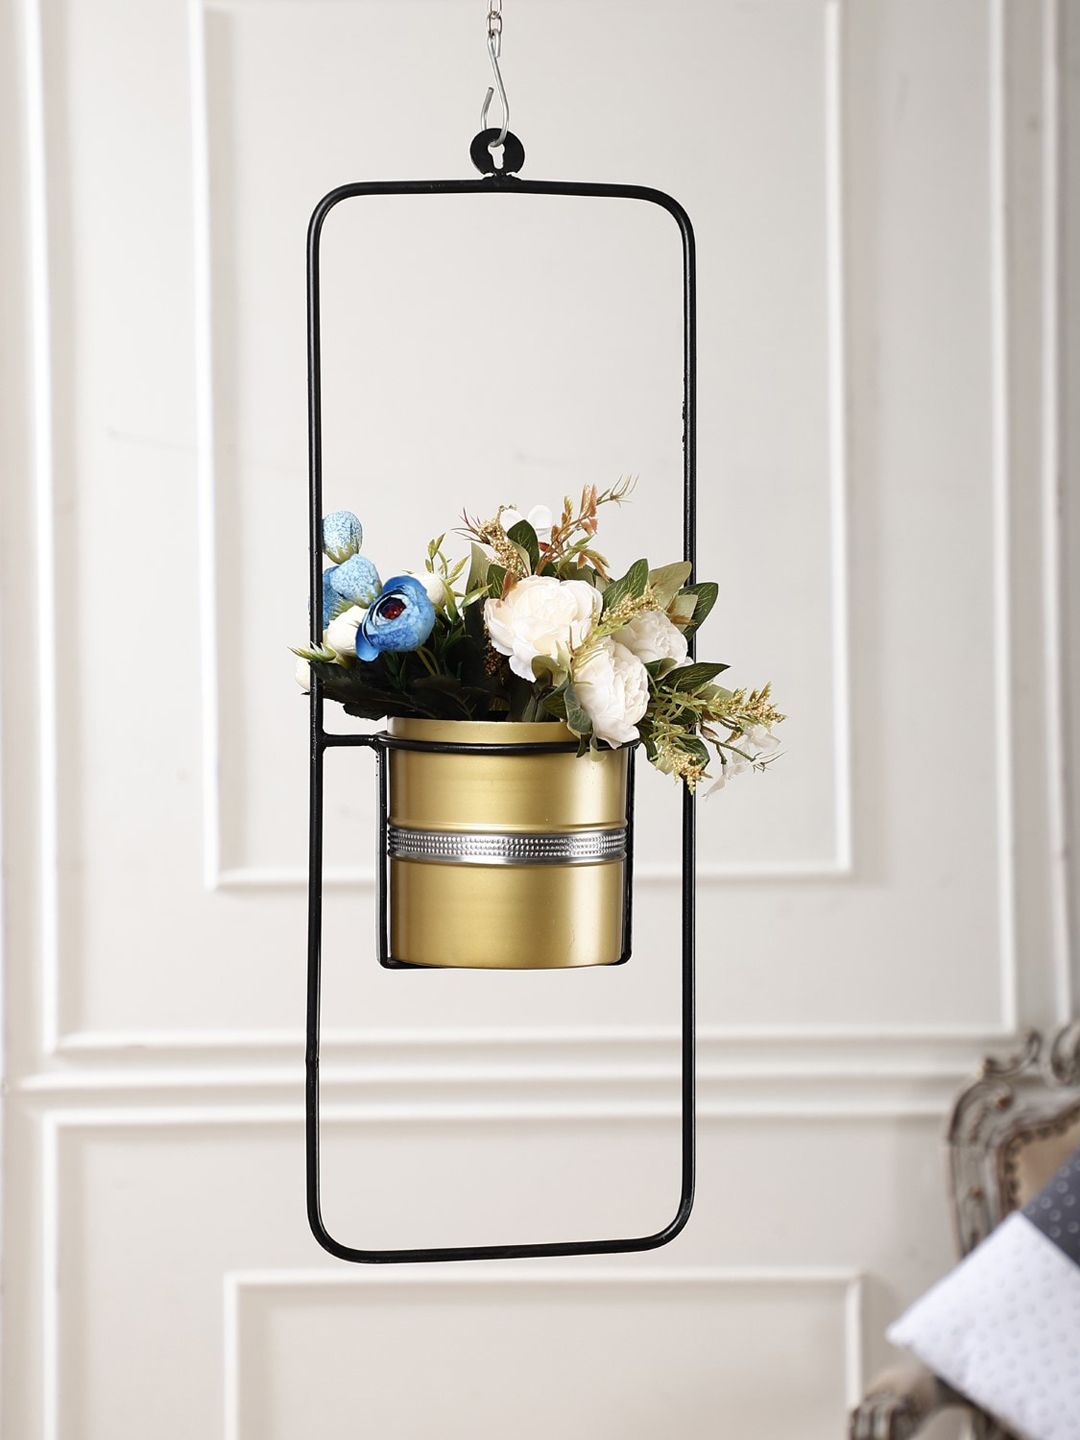 The Decor Mart Gold and Silver Stunning Hanging Metal Planter Price in India